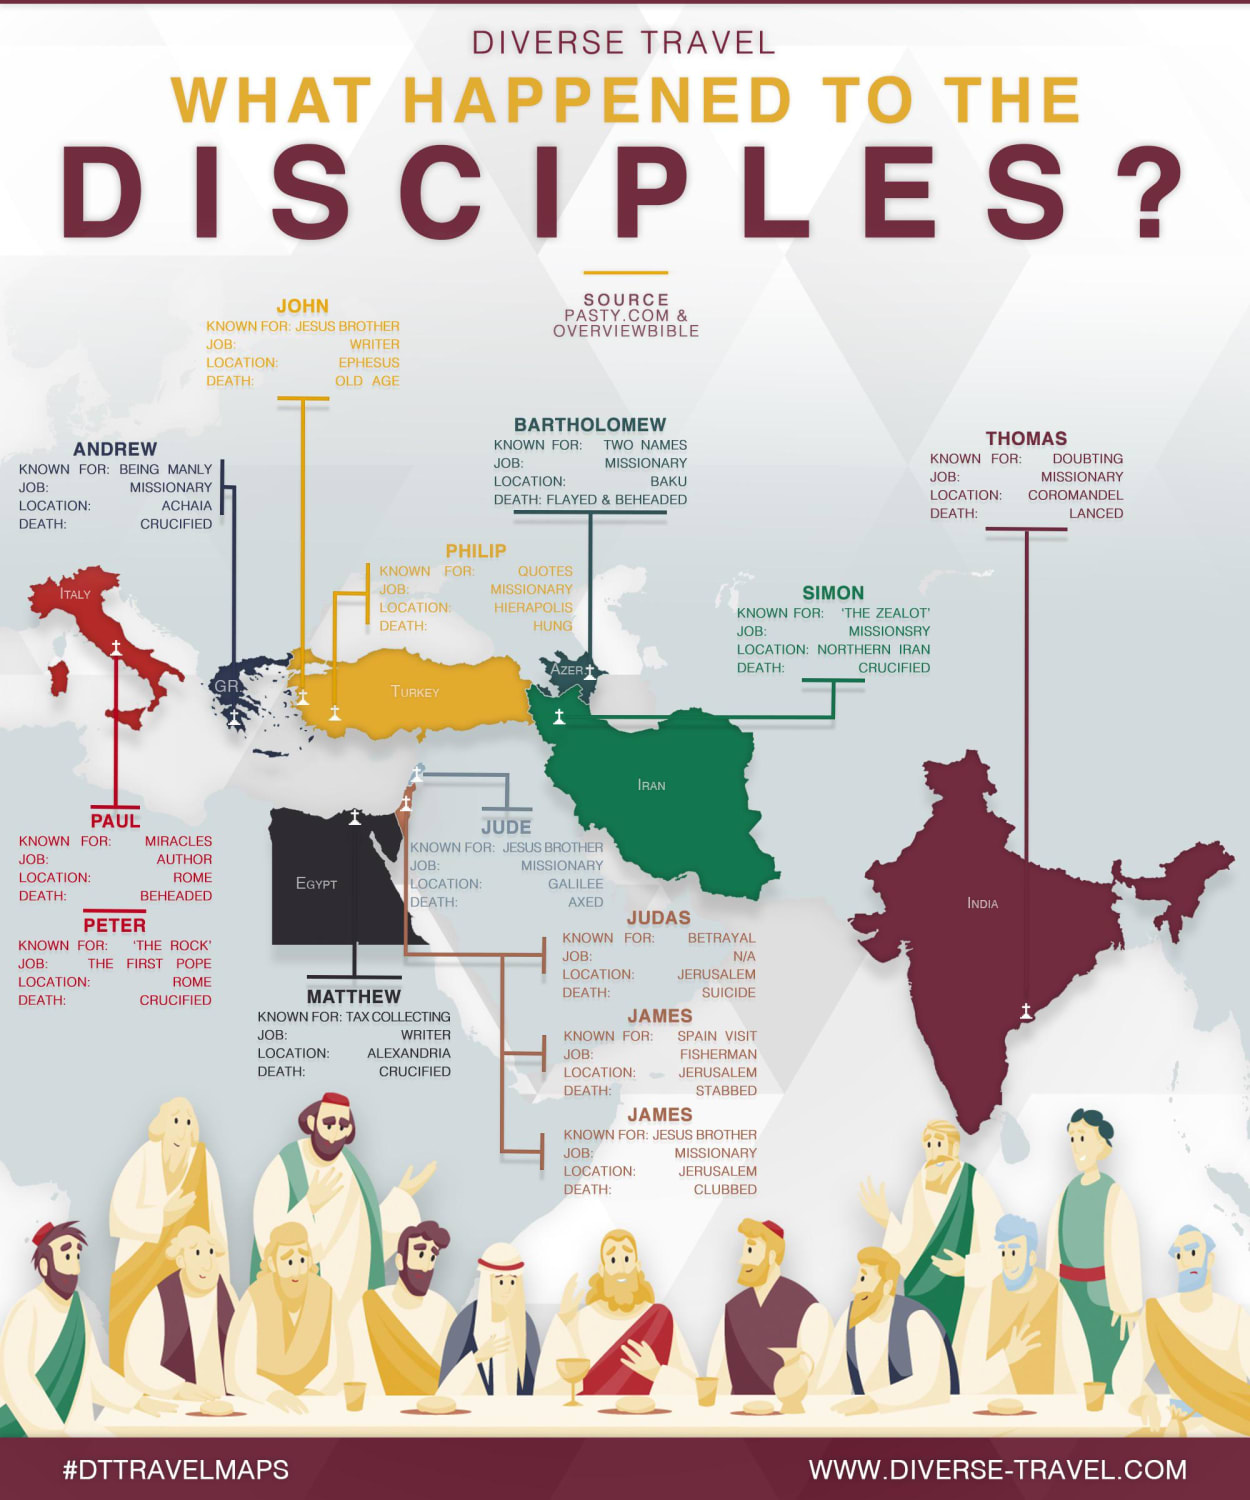 What Happened to the Disciples?